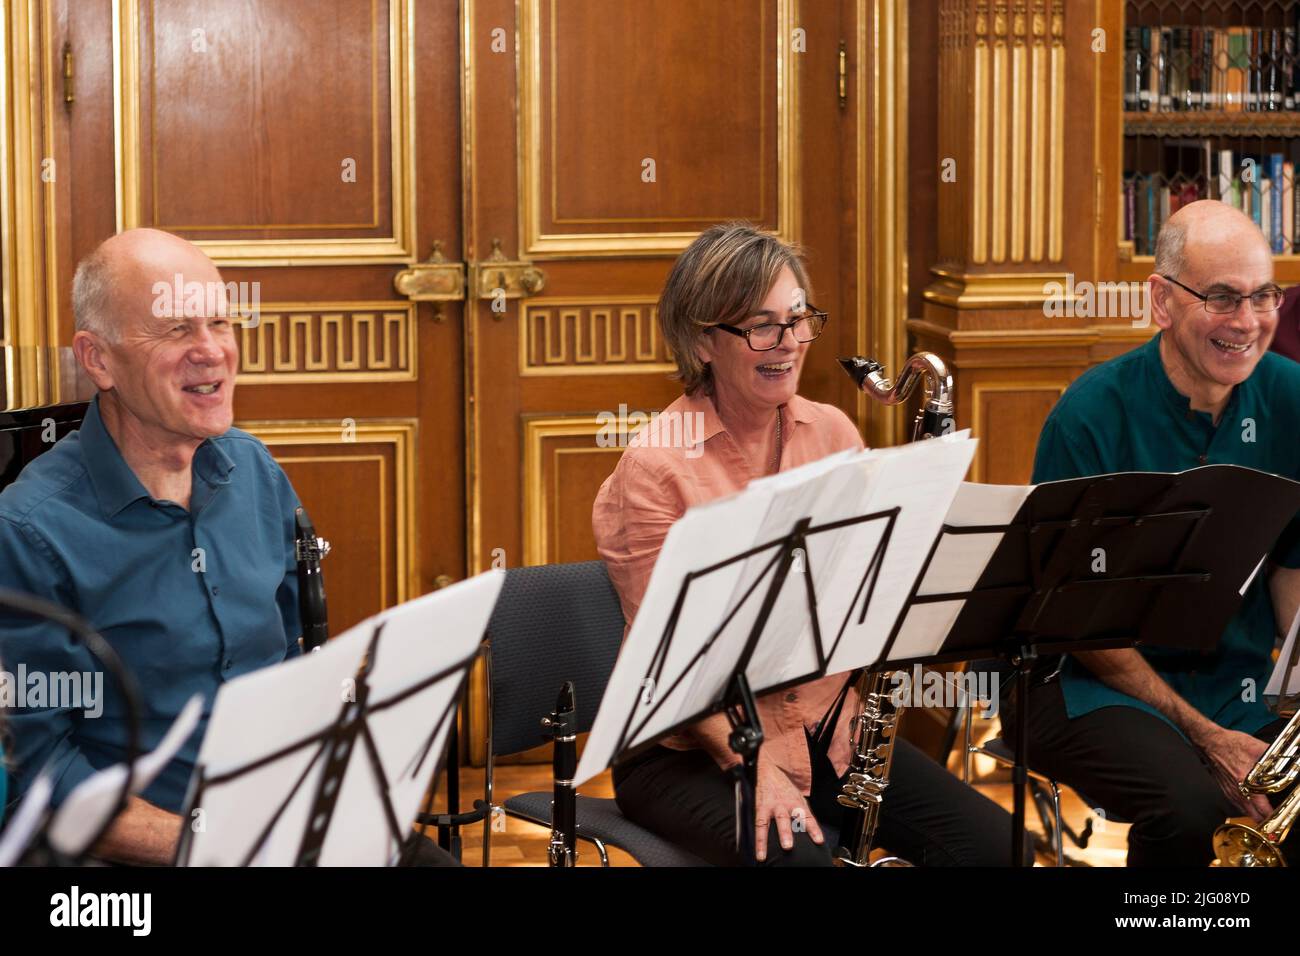 Musicians share a joke during a CoMA (Contemporary Music for All) rehearsal at West Dean Collage, 2019 Stock Photo